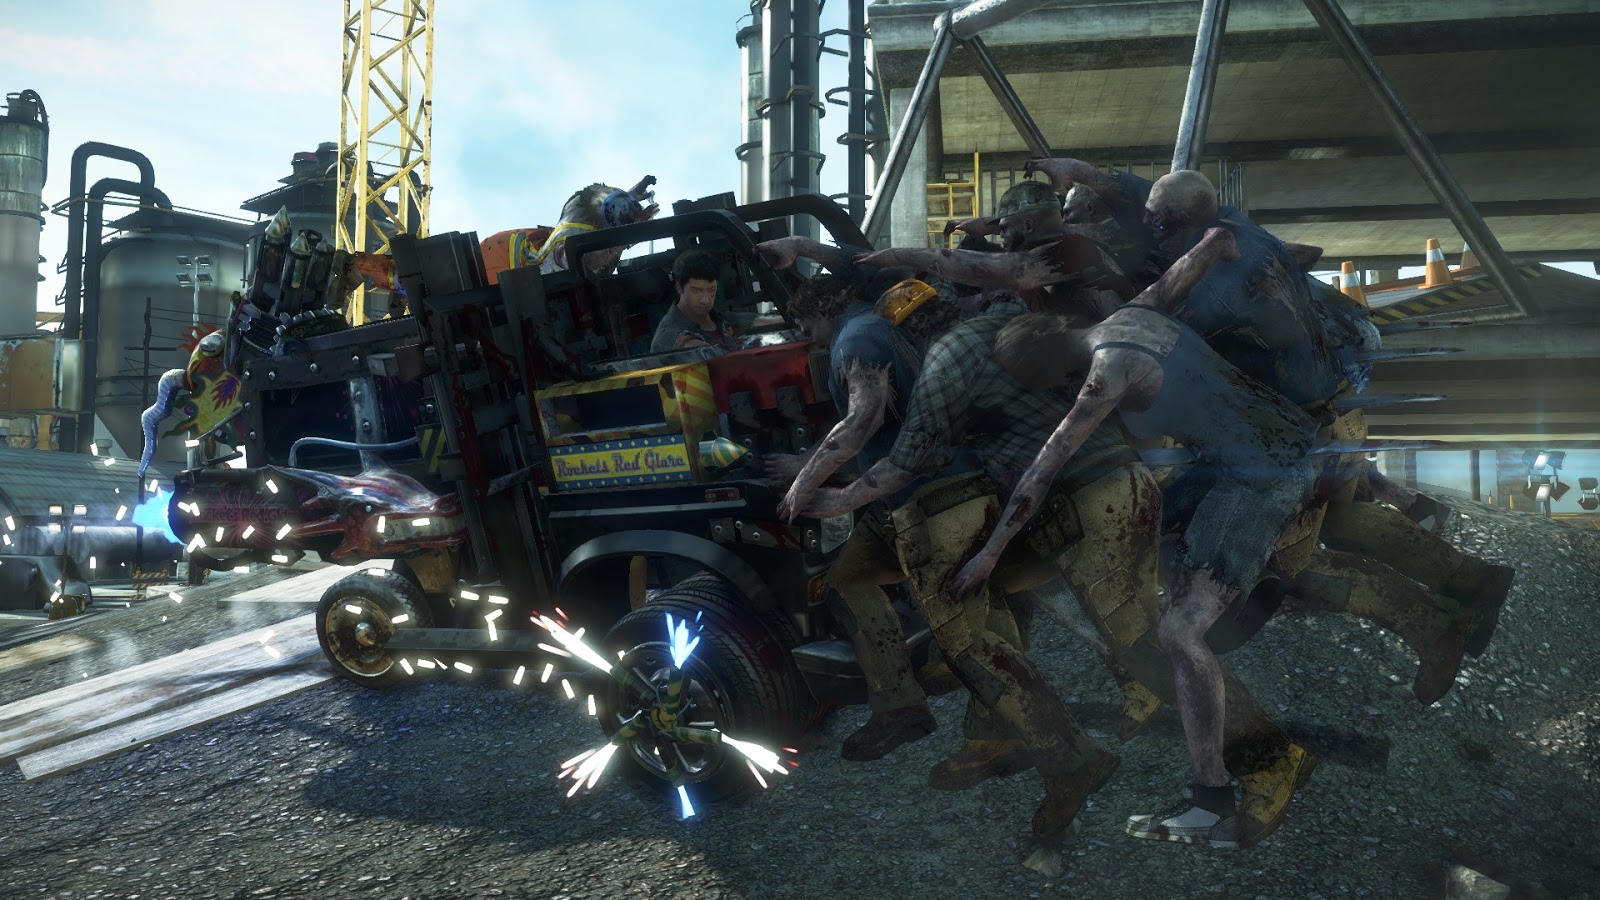 Dead Rising 2 Faqs, Walkthroughs, And Guides For PC